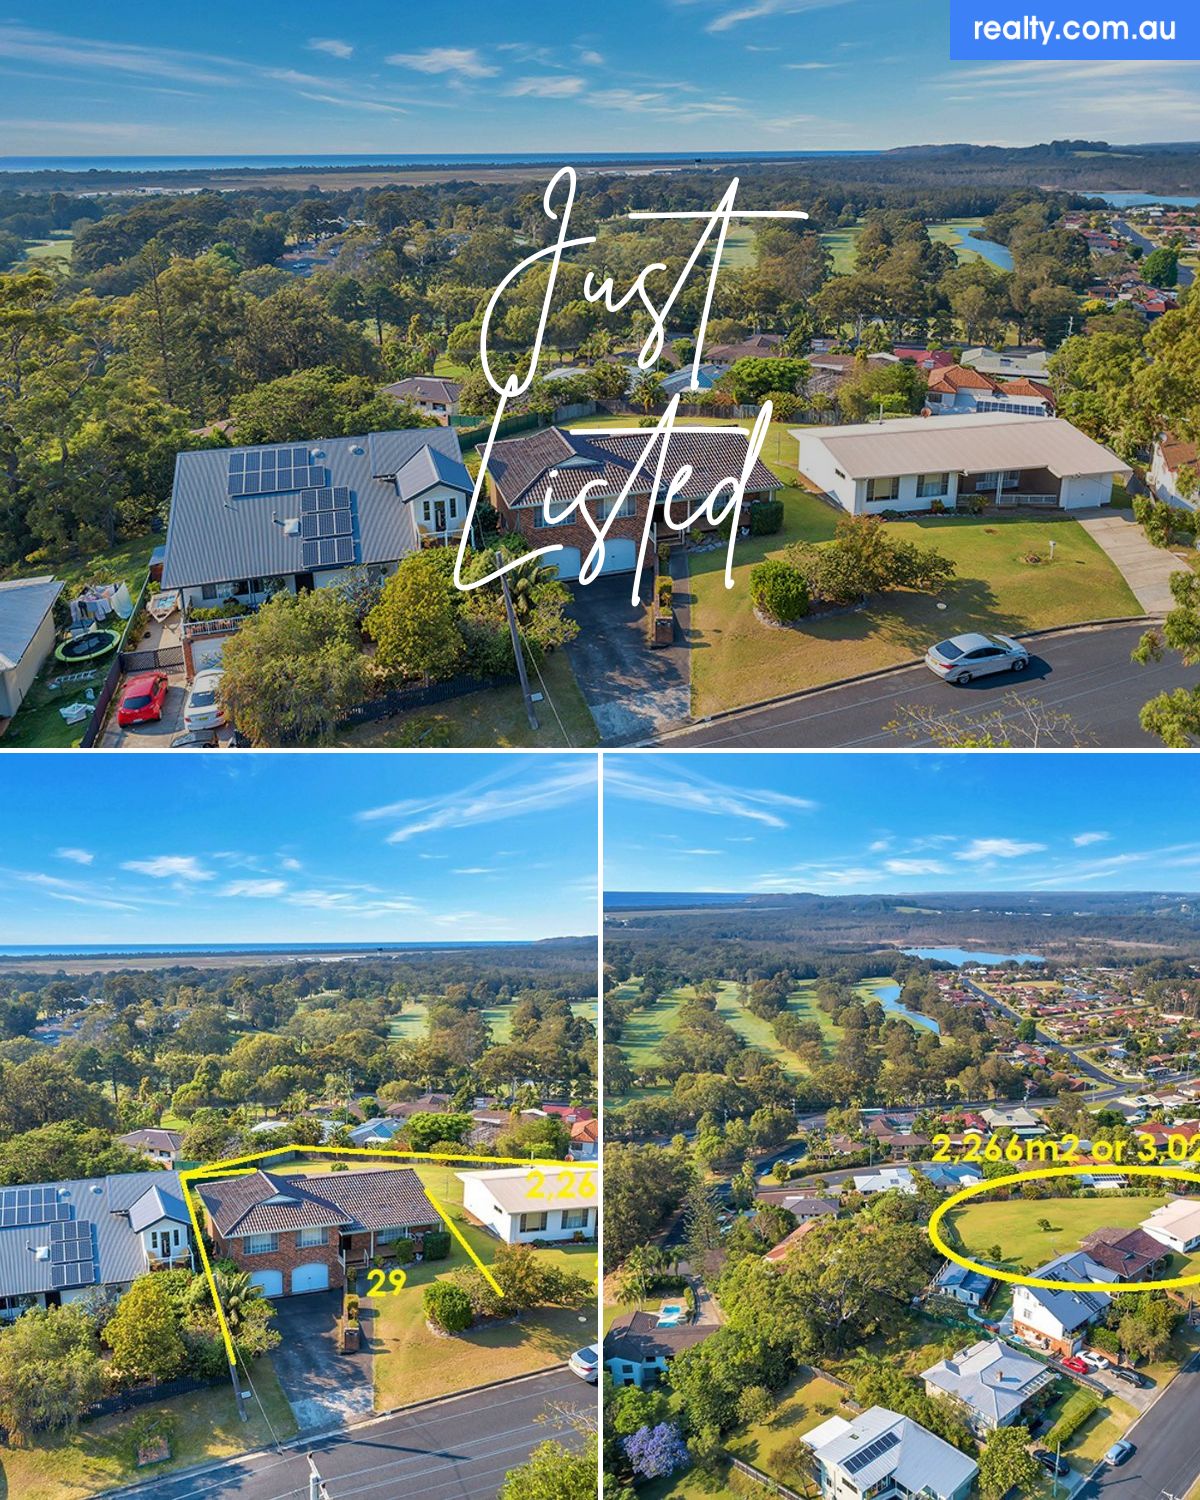 27 - 29 Raleigh Street, Coffs Harbour, NSW 2450 | Realty.com.au